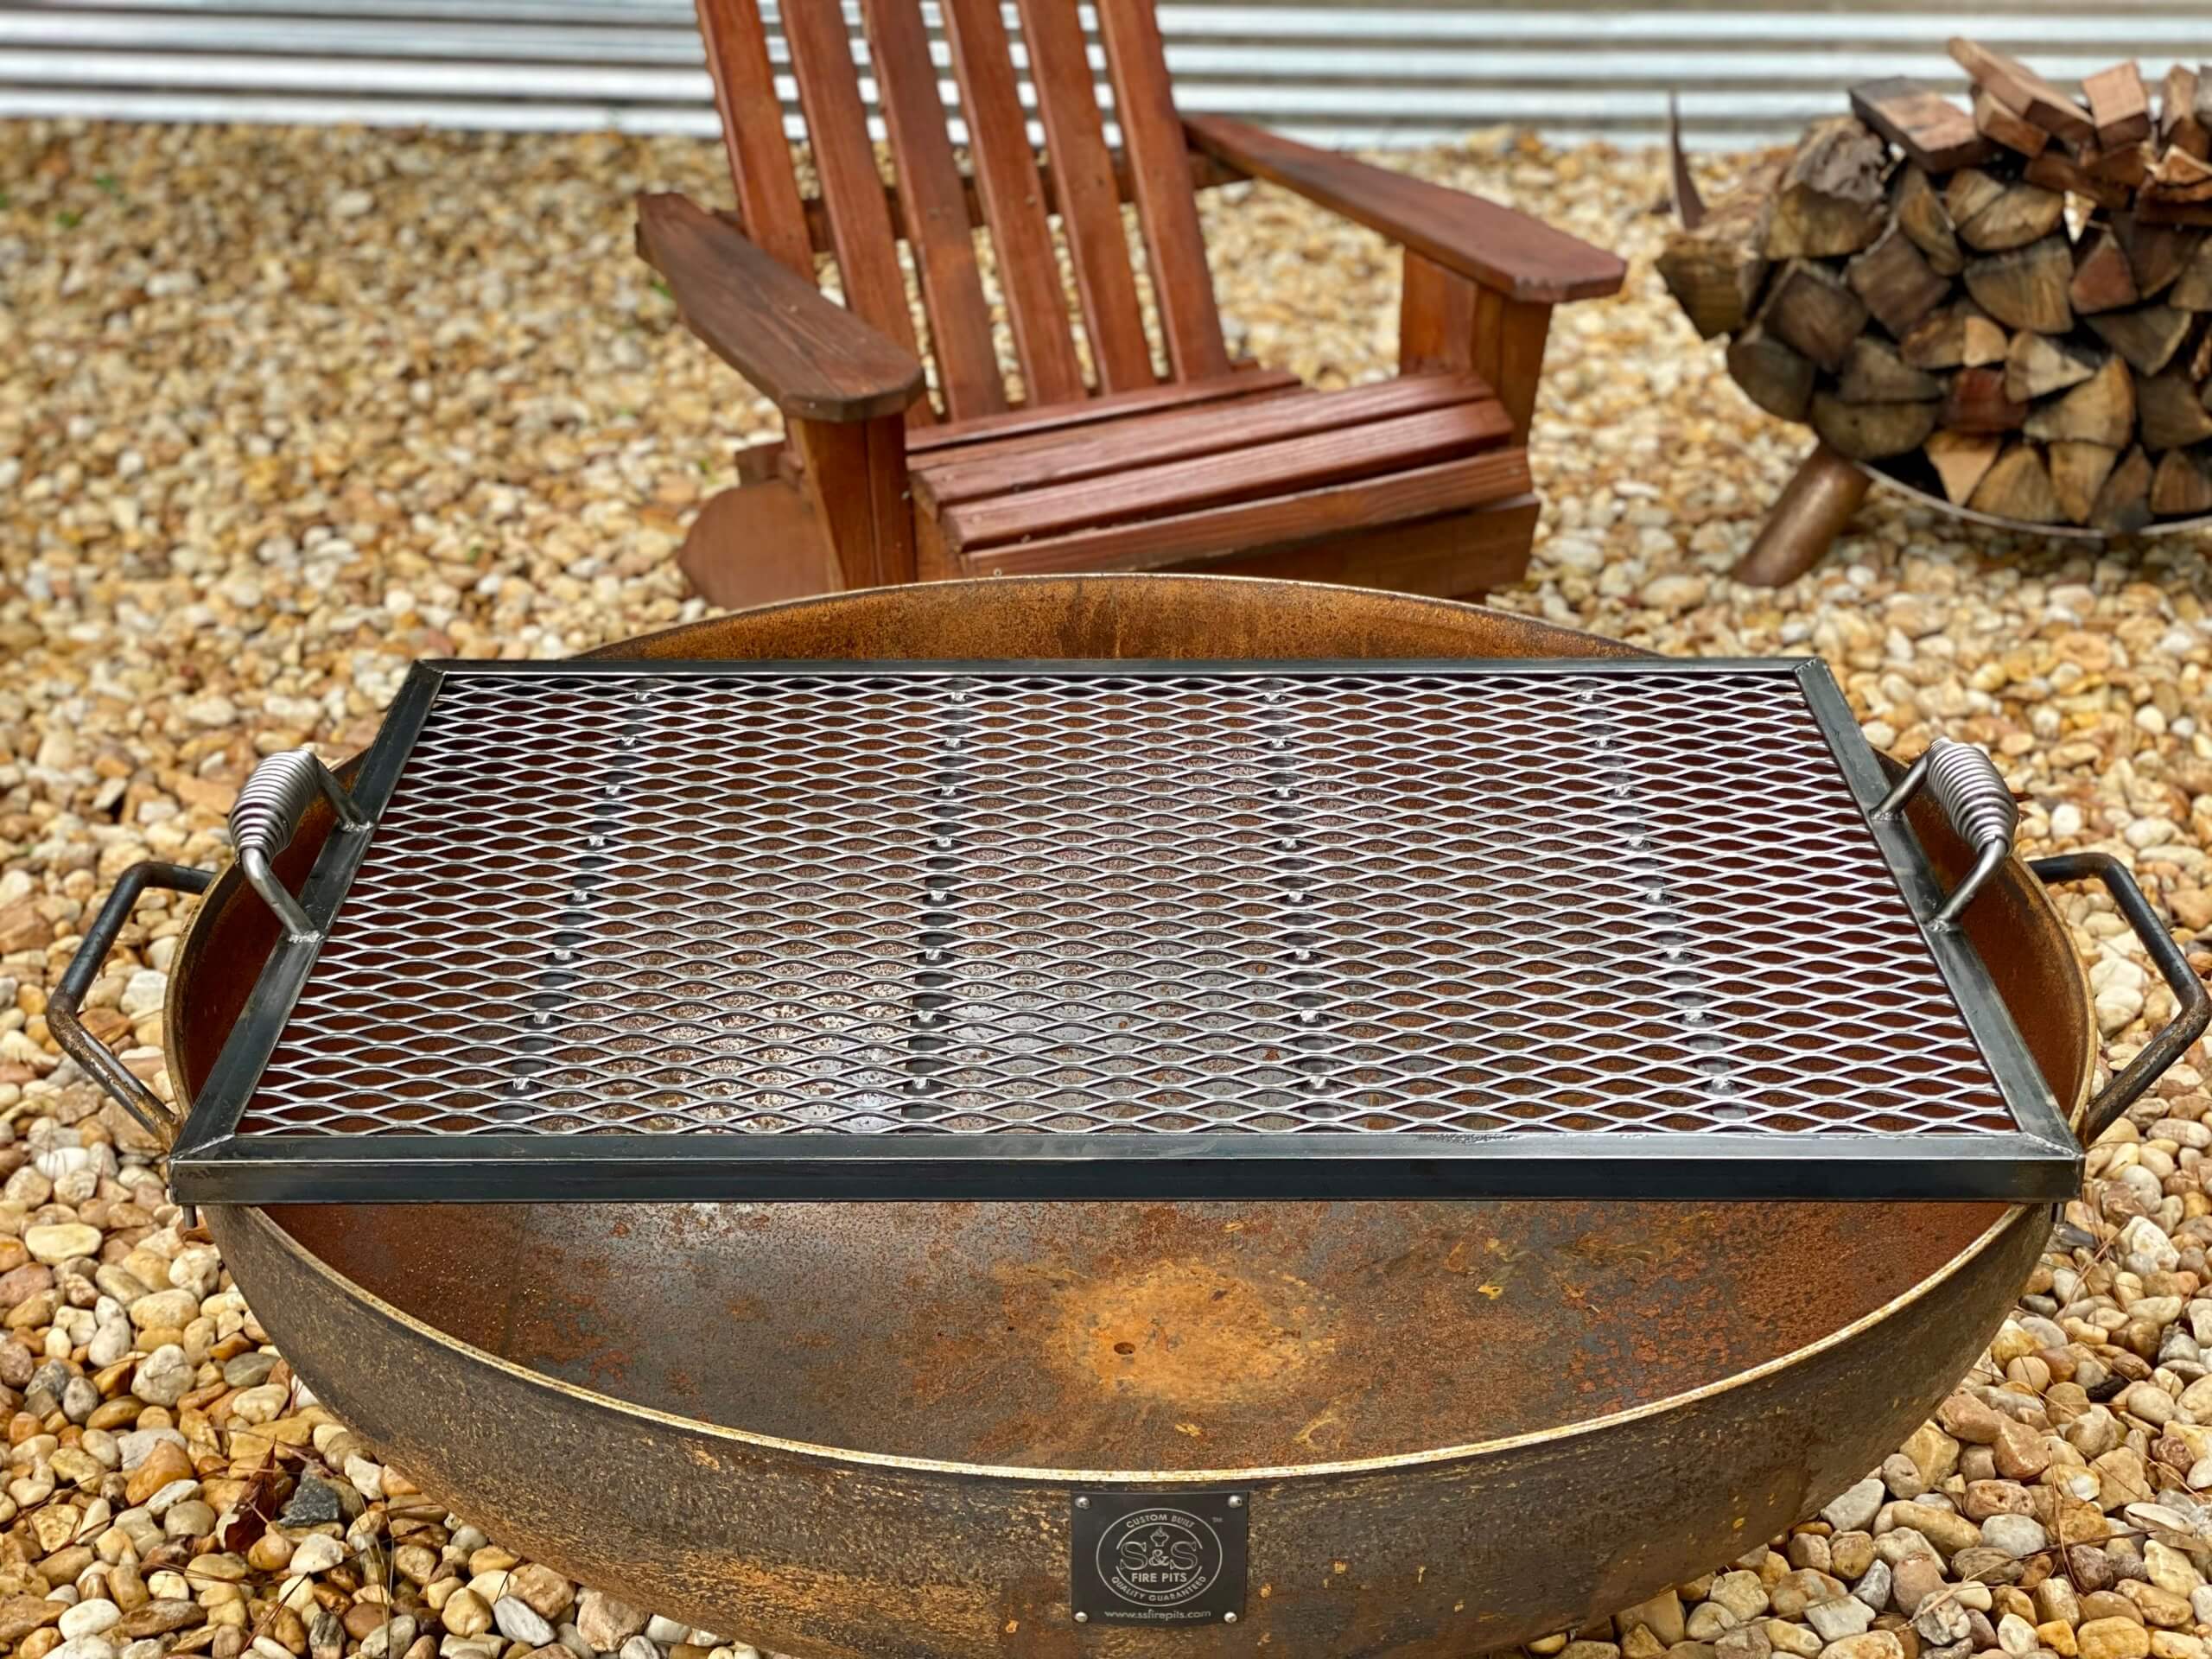 42 Heavy Duty Handcrafted Fire Pit, How To Use Fire Pit Grate